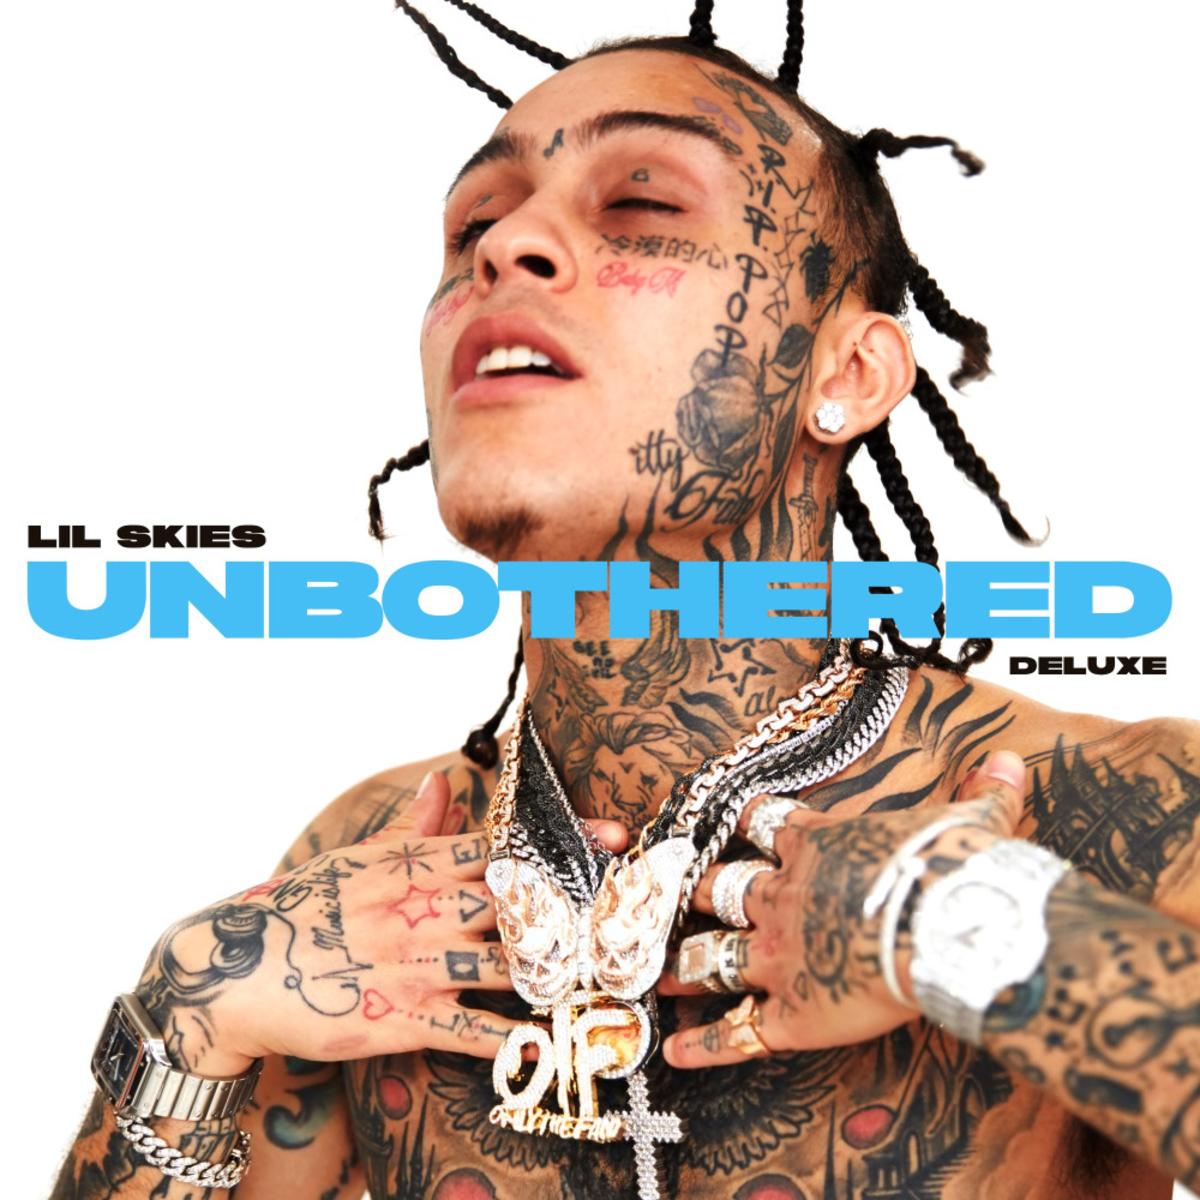 Listen To “Unbothered” By Lil Skies